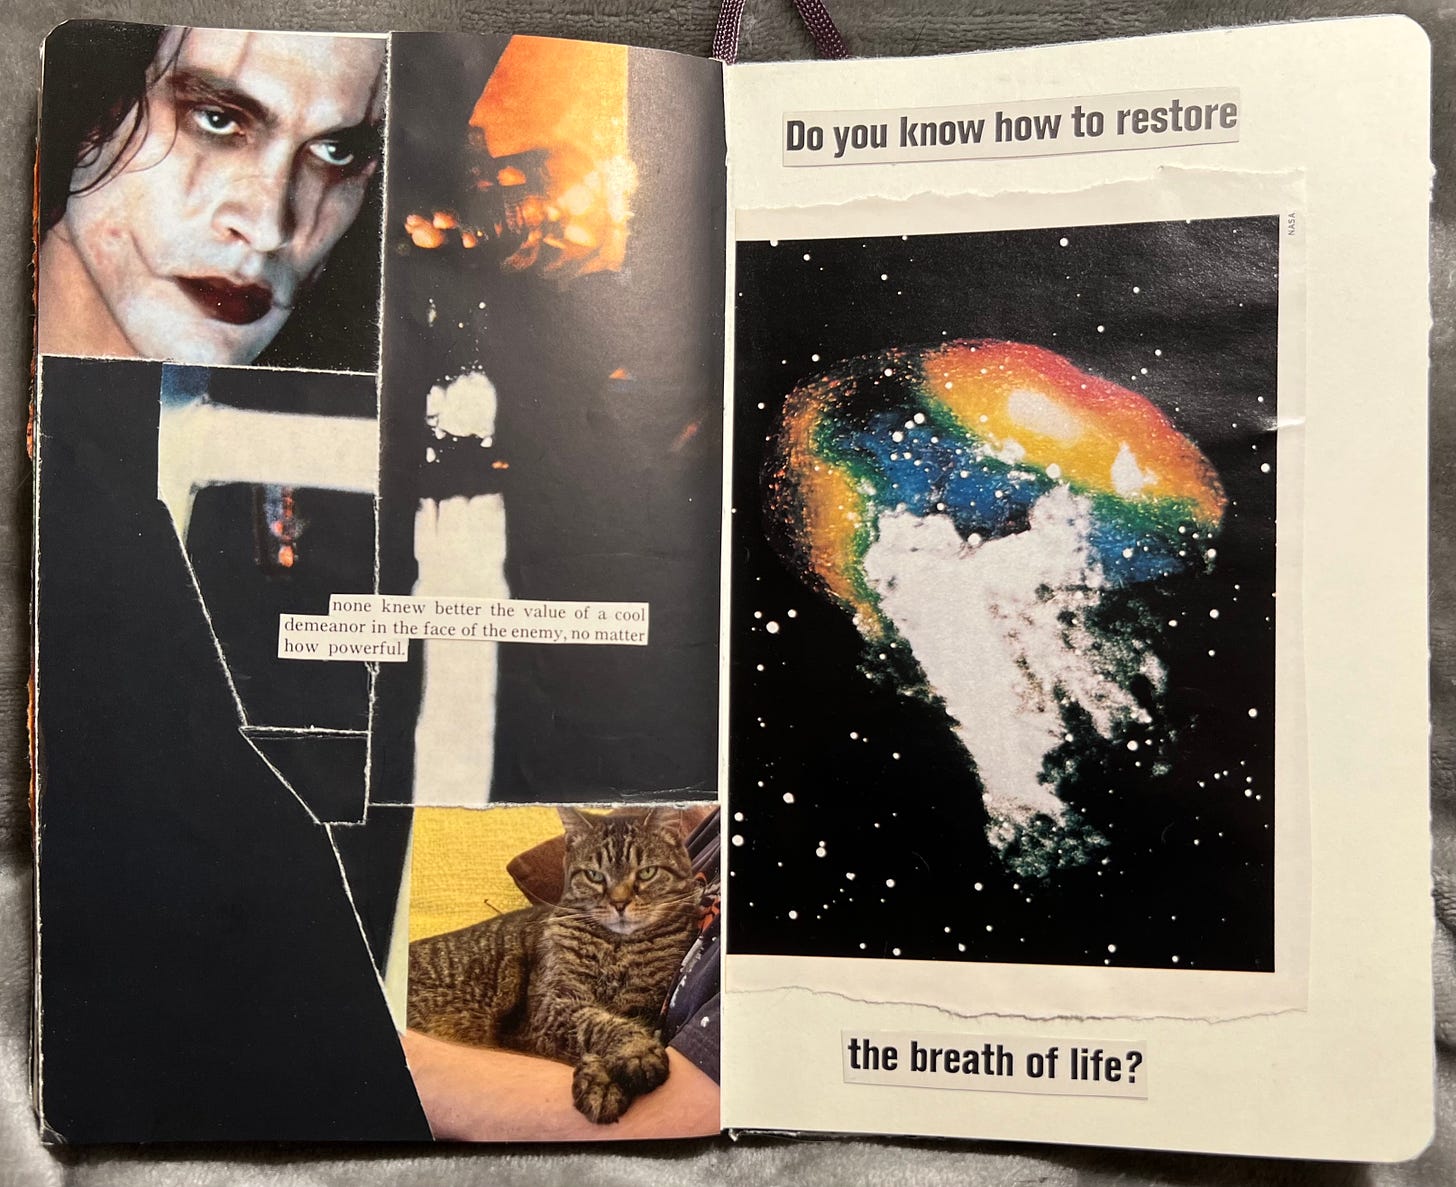 a collage book spread, on the left is brandon lee as the crow and a cat both staring intently with the words "none knew better the value of a cool demeanor in the face of an enemy, no matter how powerful" and on the right is an image of outer space with bright rainbow colors surrounded by the text "do you know how to restore the breath of life?"